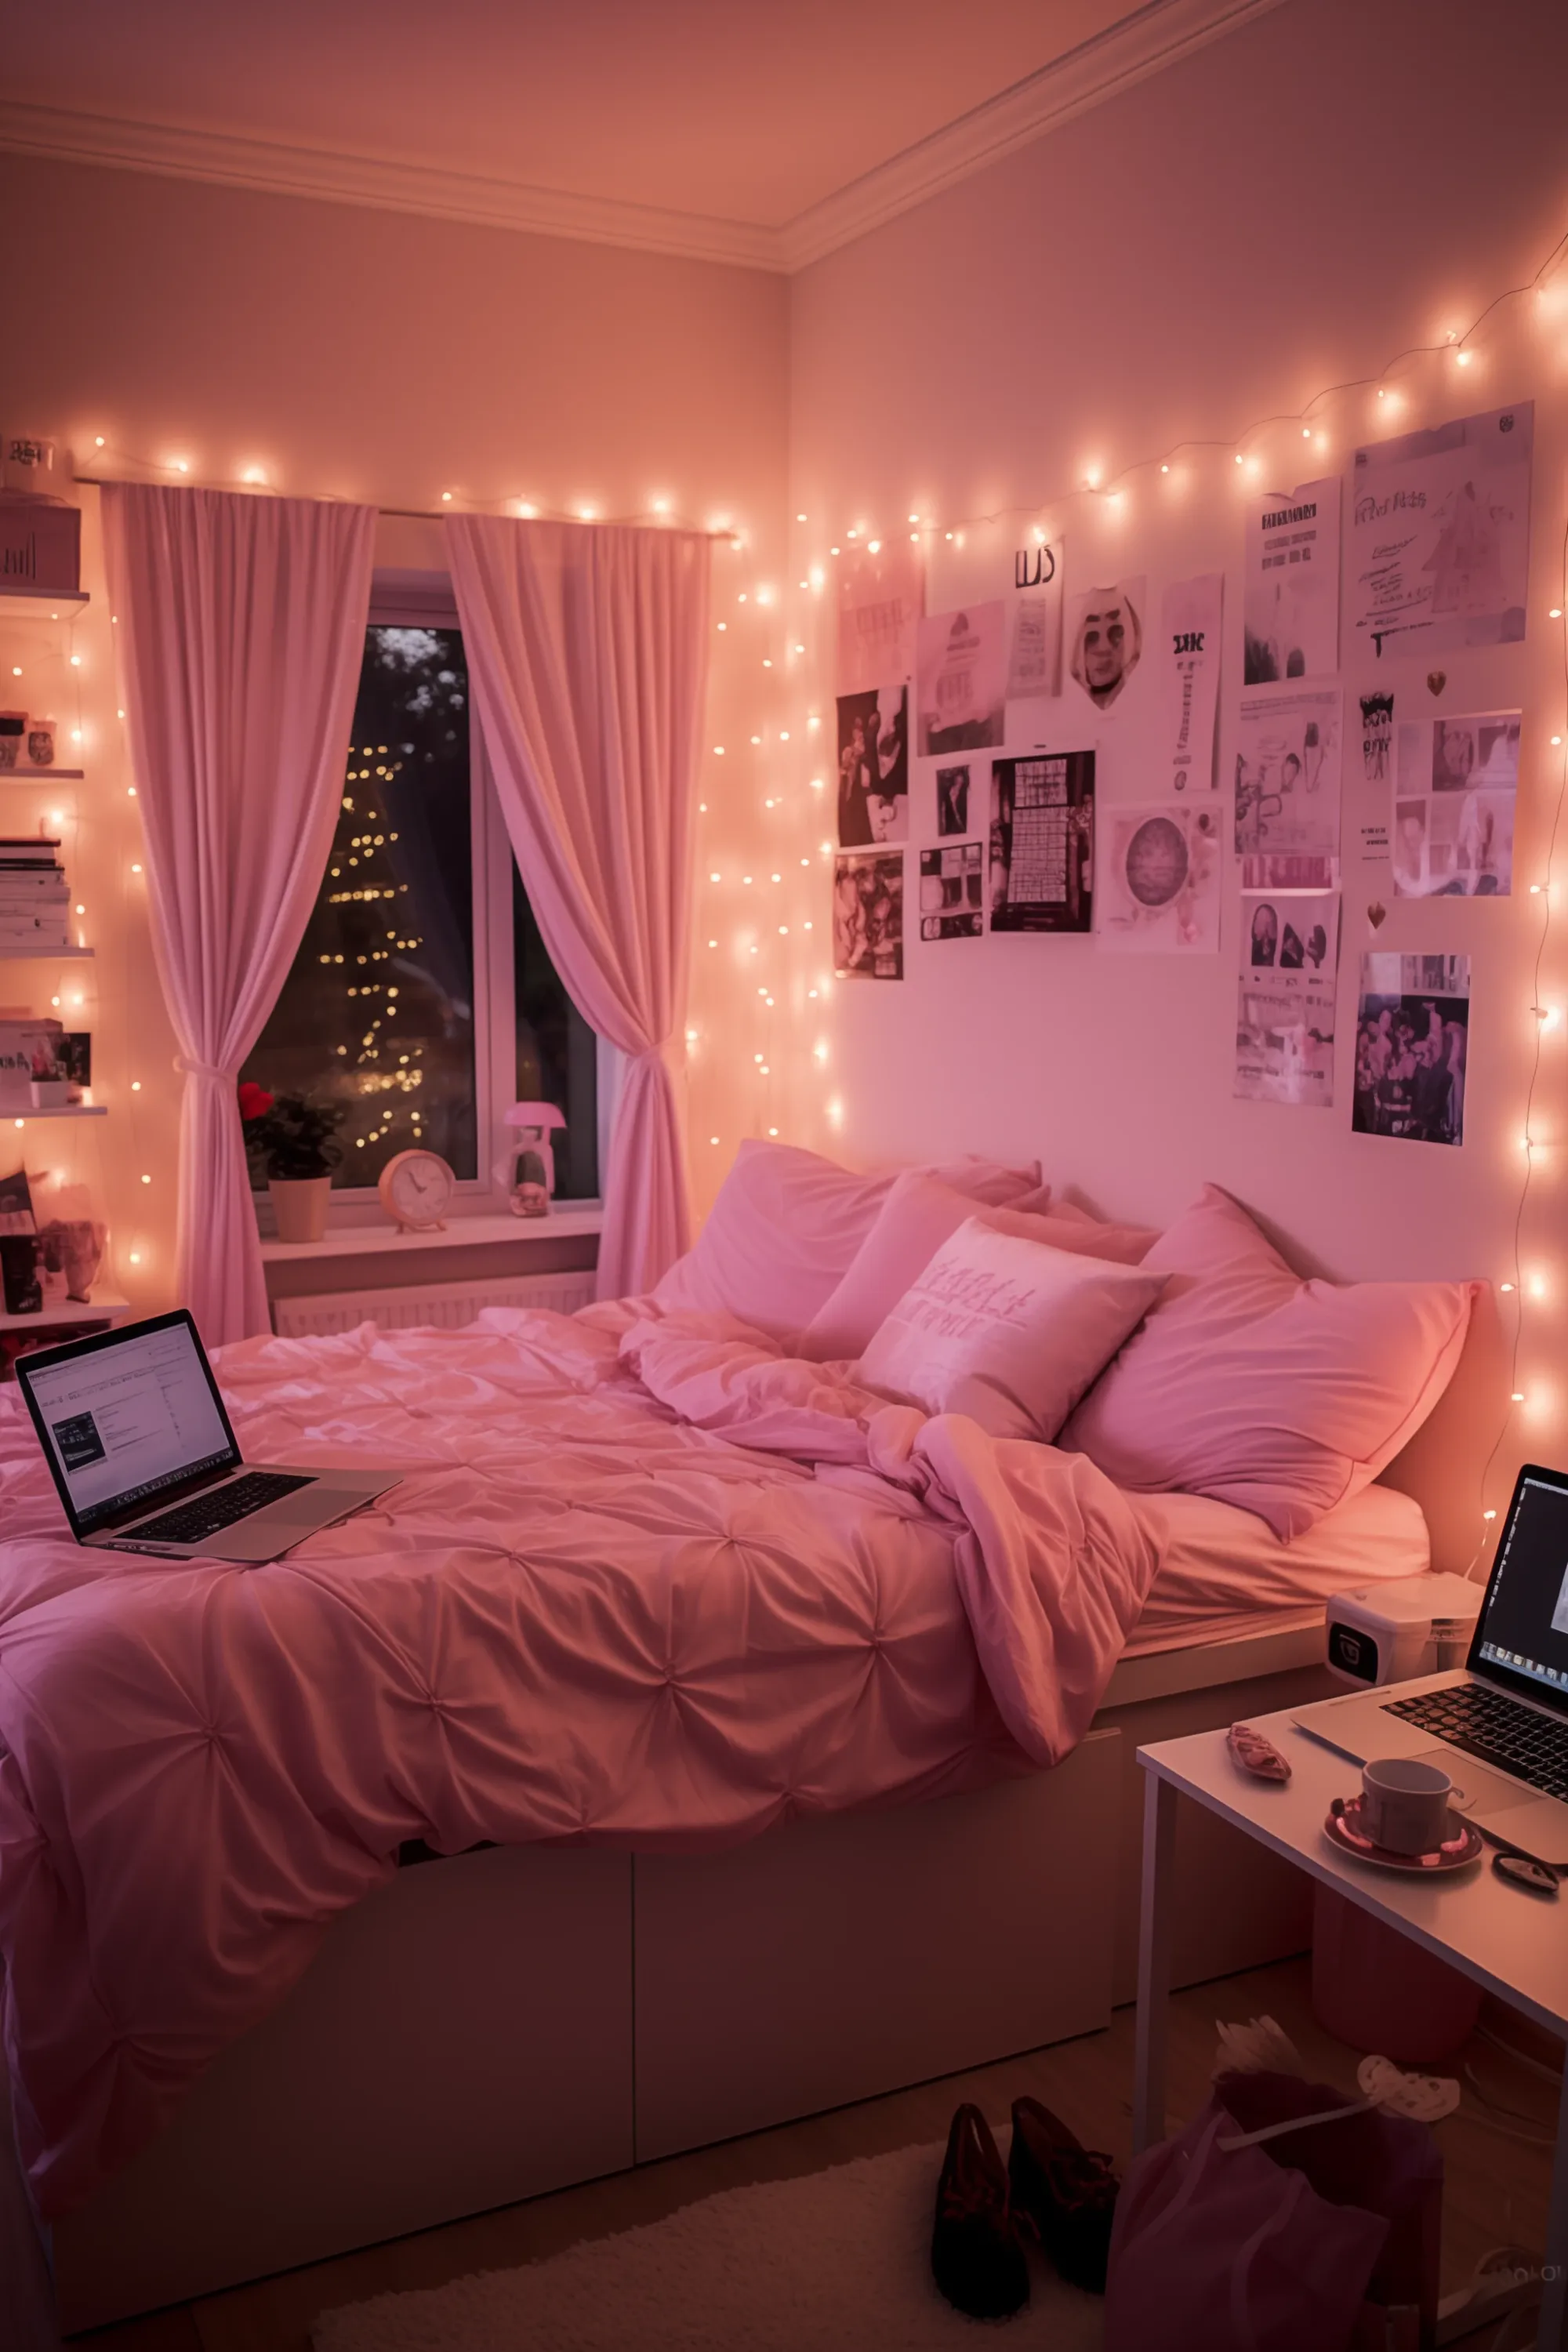 A pink and white dorm bedroom with wall art